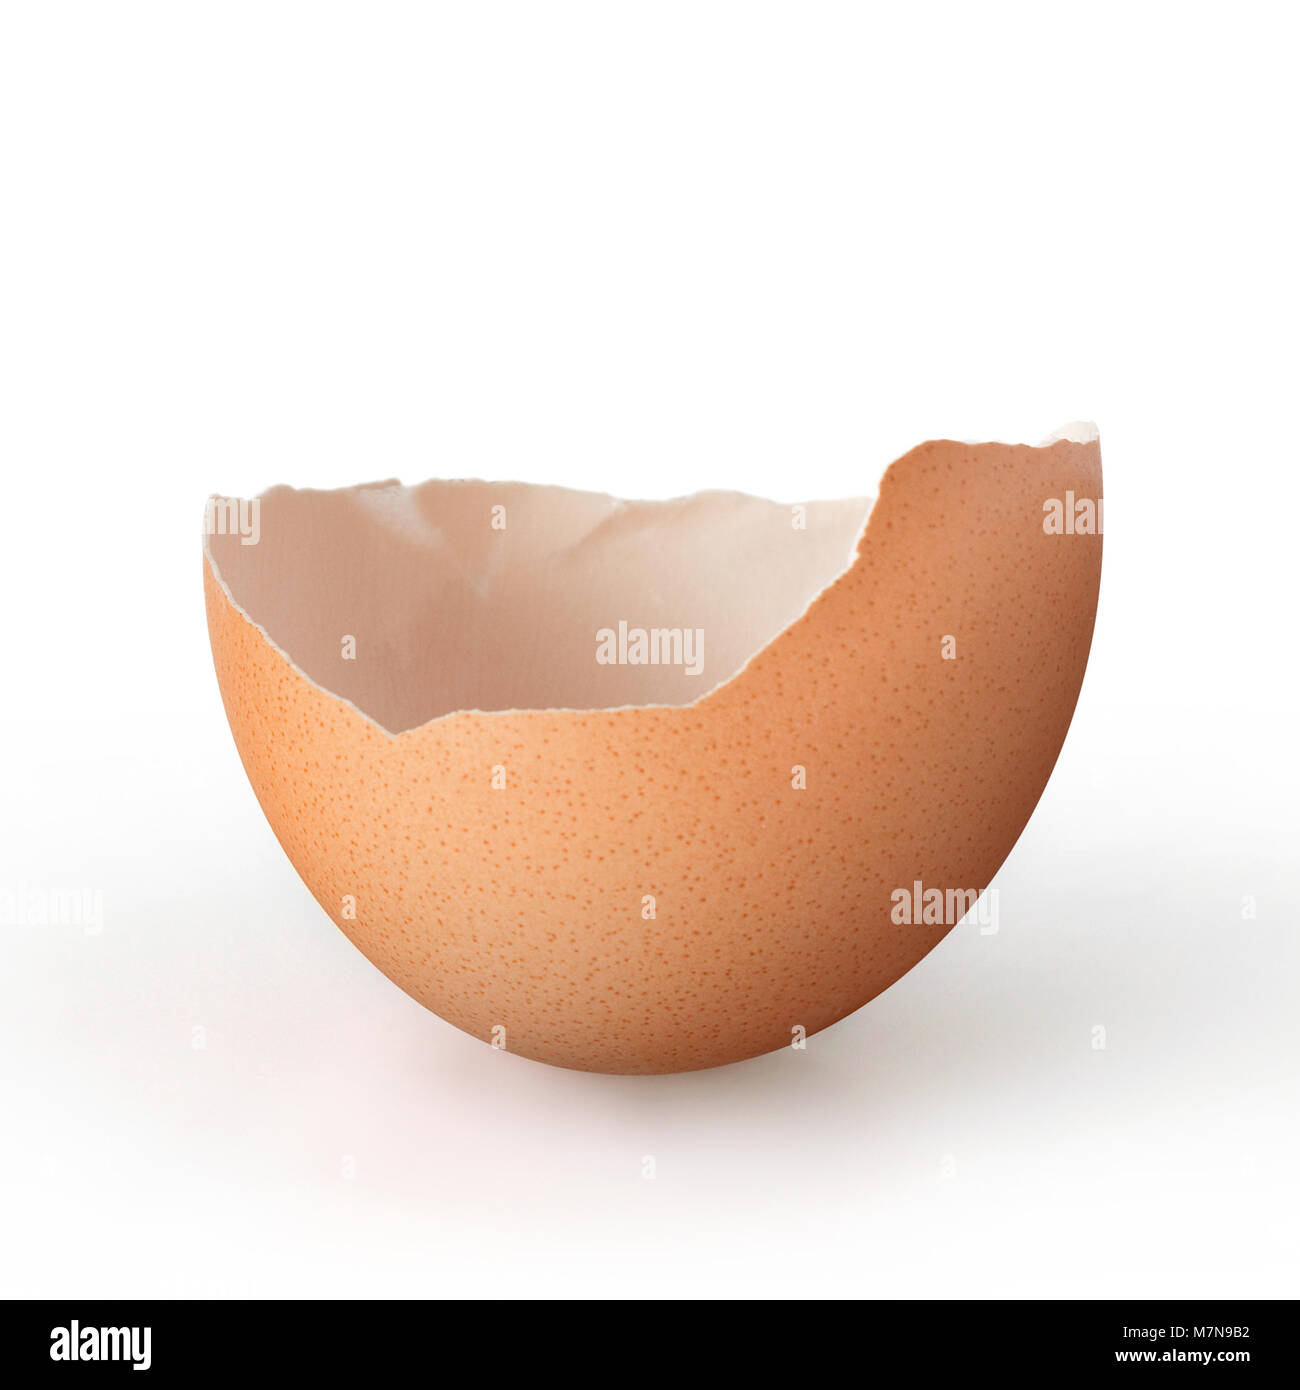 Cracked eggshell isolated over a white background. Stock Photo